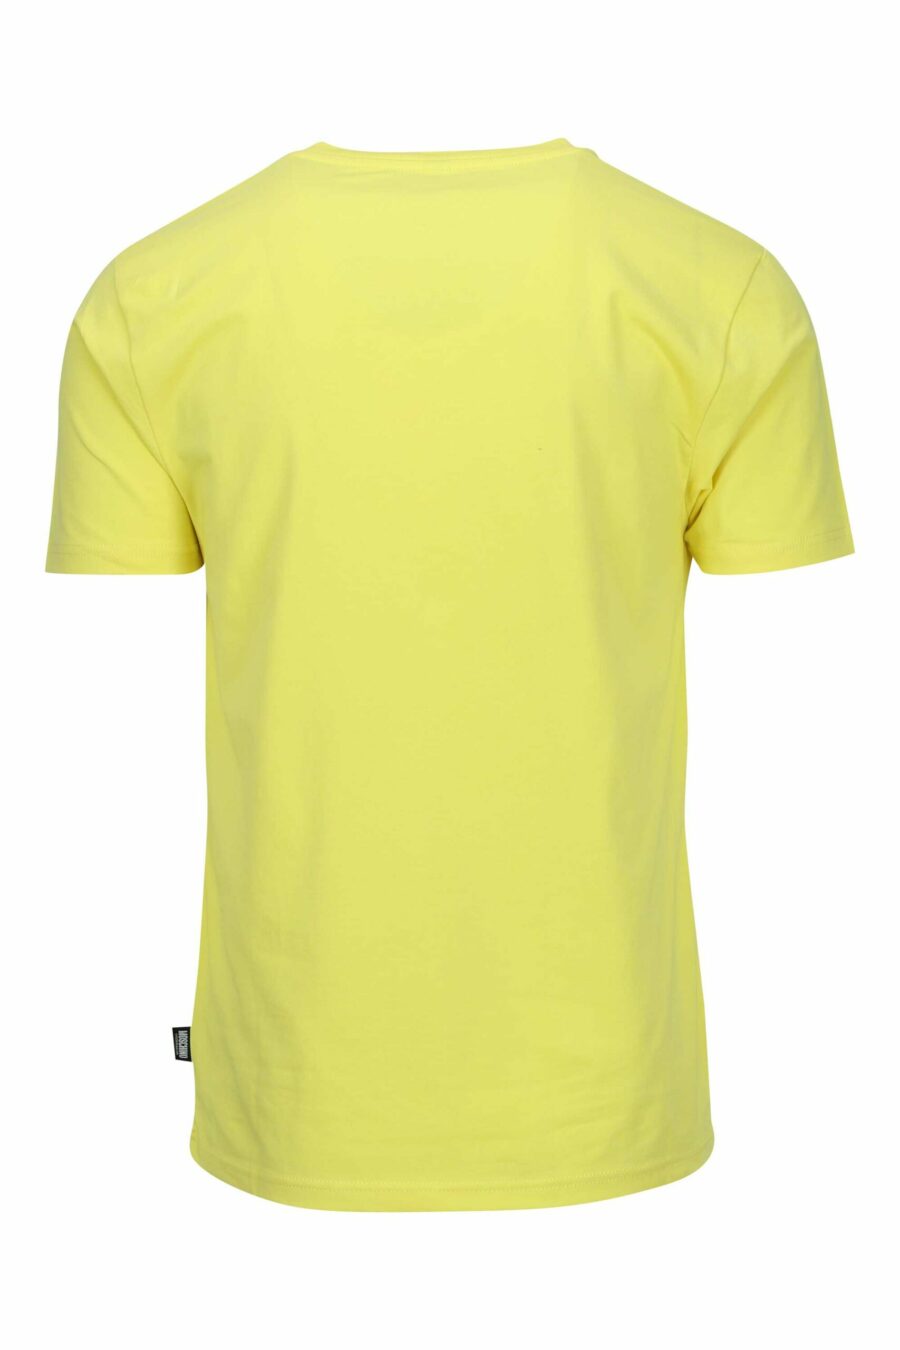 Yellow T-shirt with mini logo bear patch "underbear" - 667113605913 1 scaled